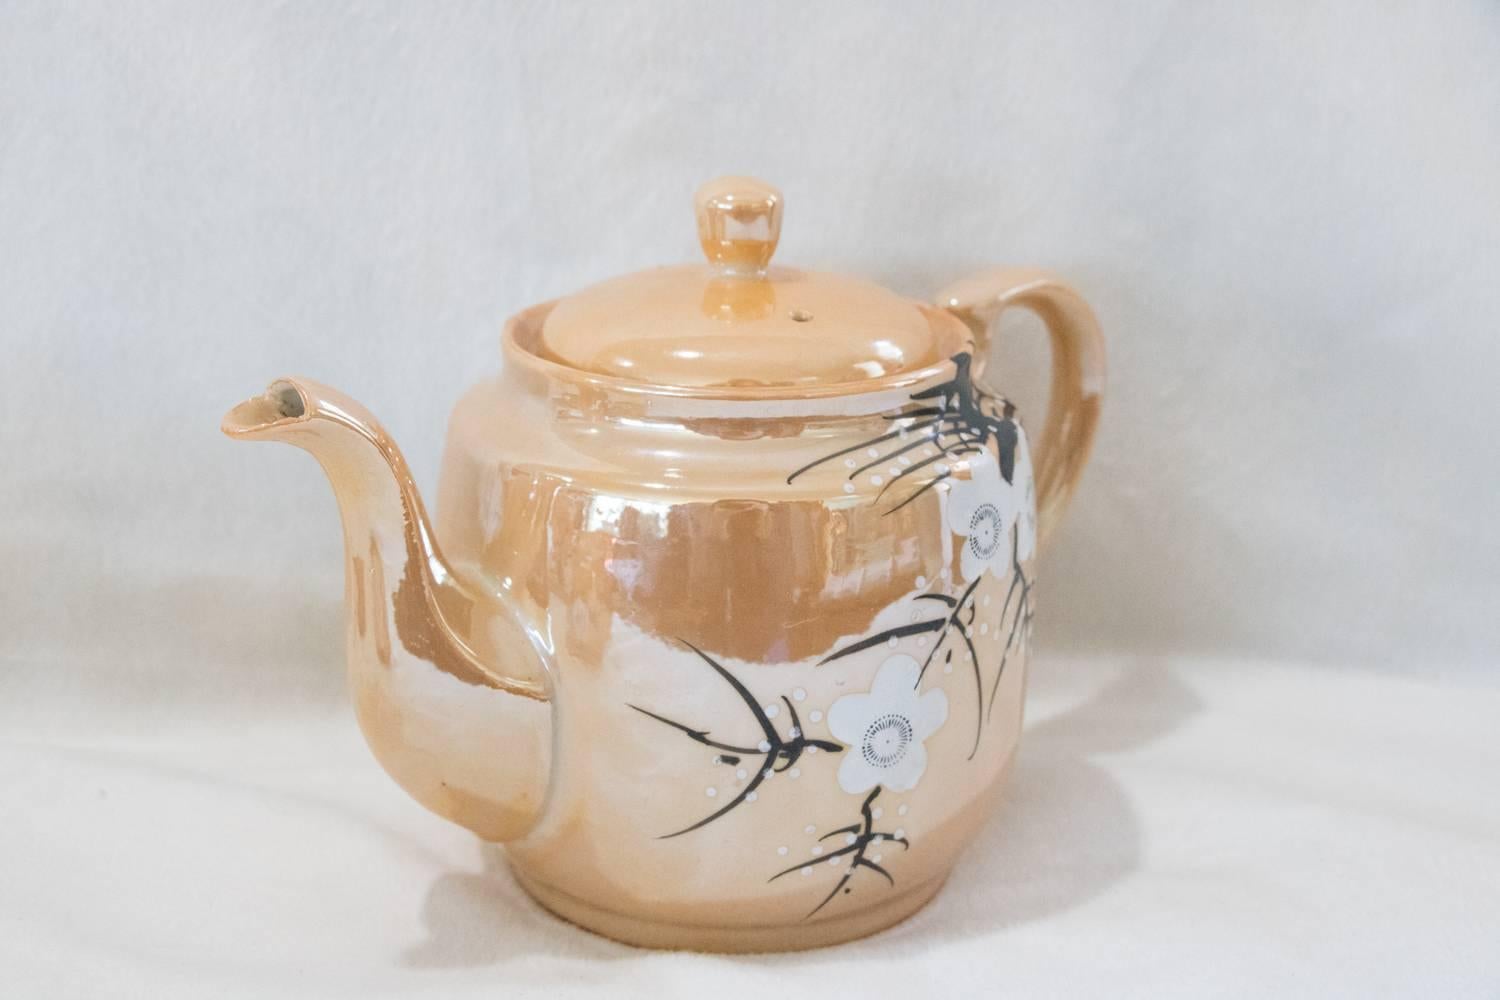 All that glimmers is not gold! Hand-painted Japanese coffee/tea white cherry blossom design iridescent interior. Beautiful soft porcelain in an iridescent taupe - coffee/tea pot, creamer, sugar, four cups, two saucer plates.

Measure: Sugar bowl: